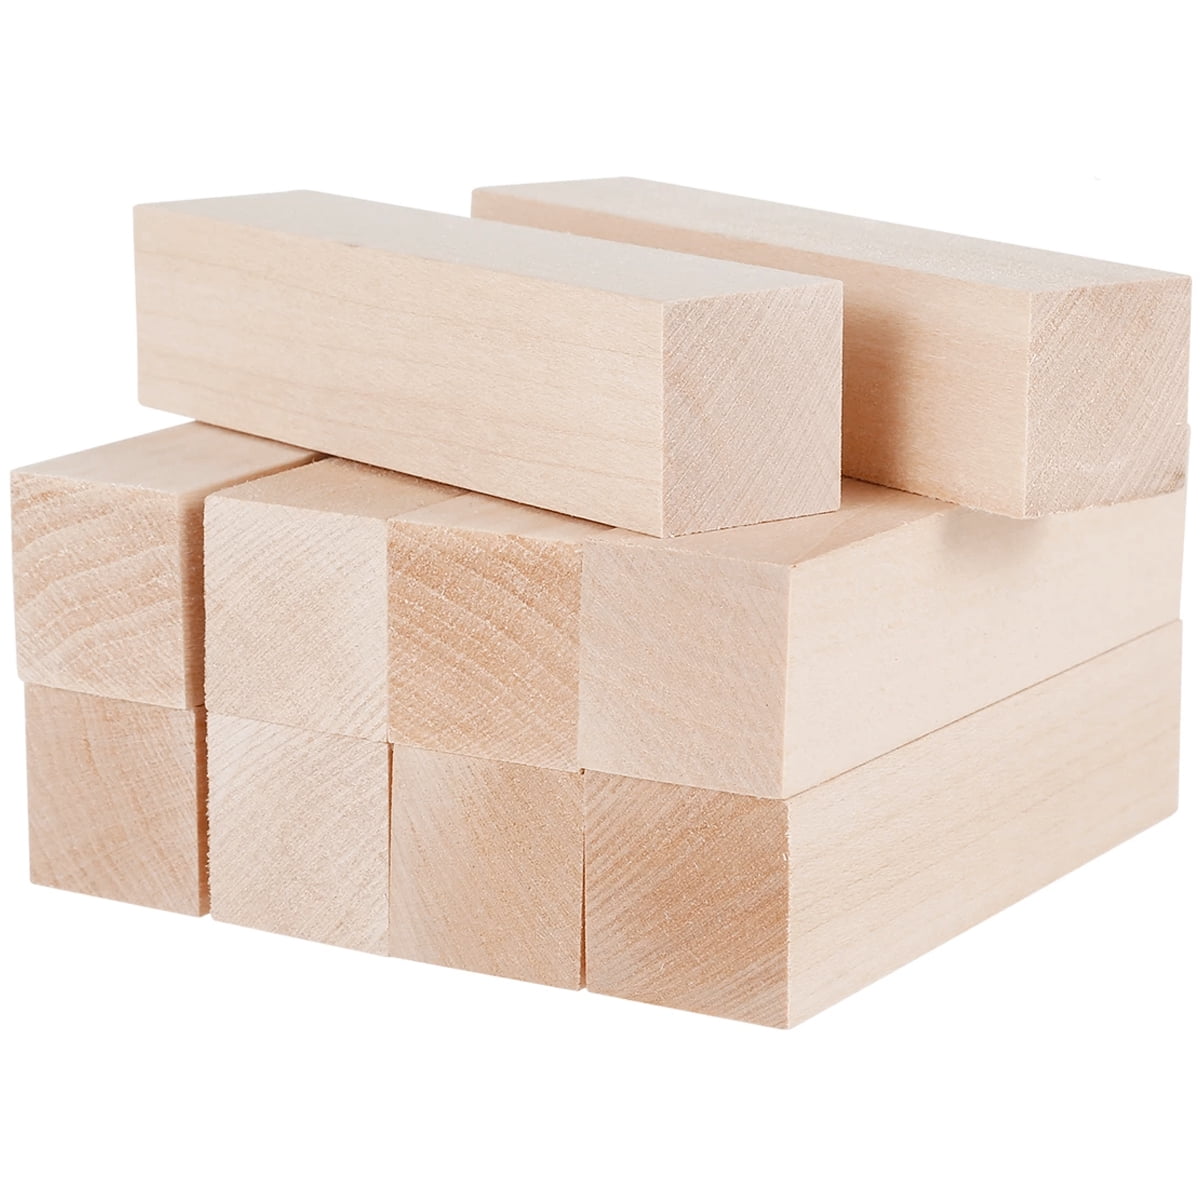  16Pack Basswood Sheets 12 x 8 x 1/16 Inch Unfinished